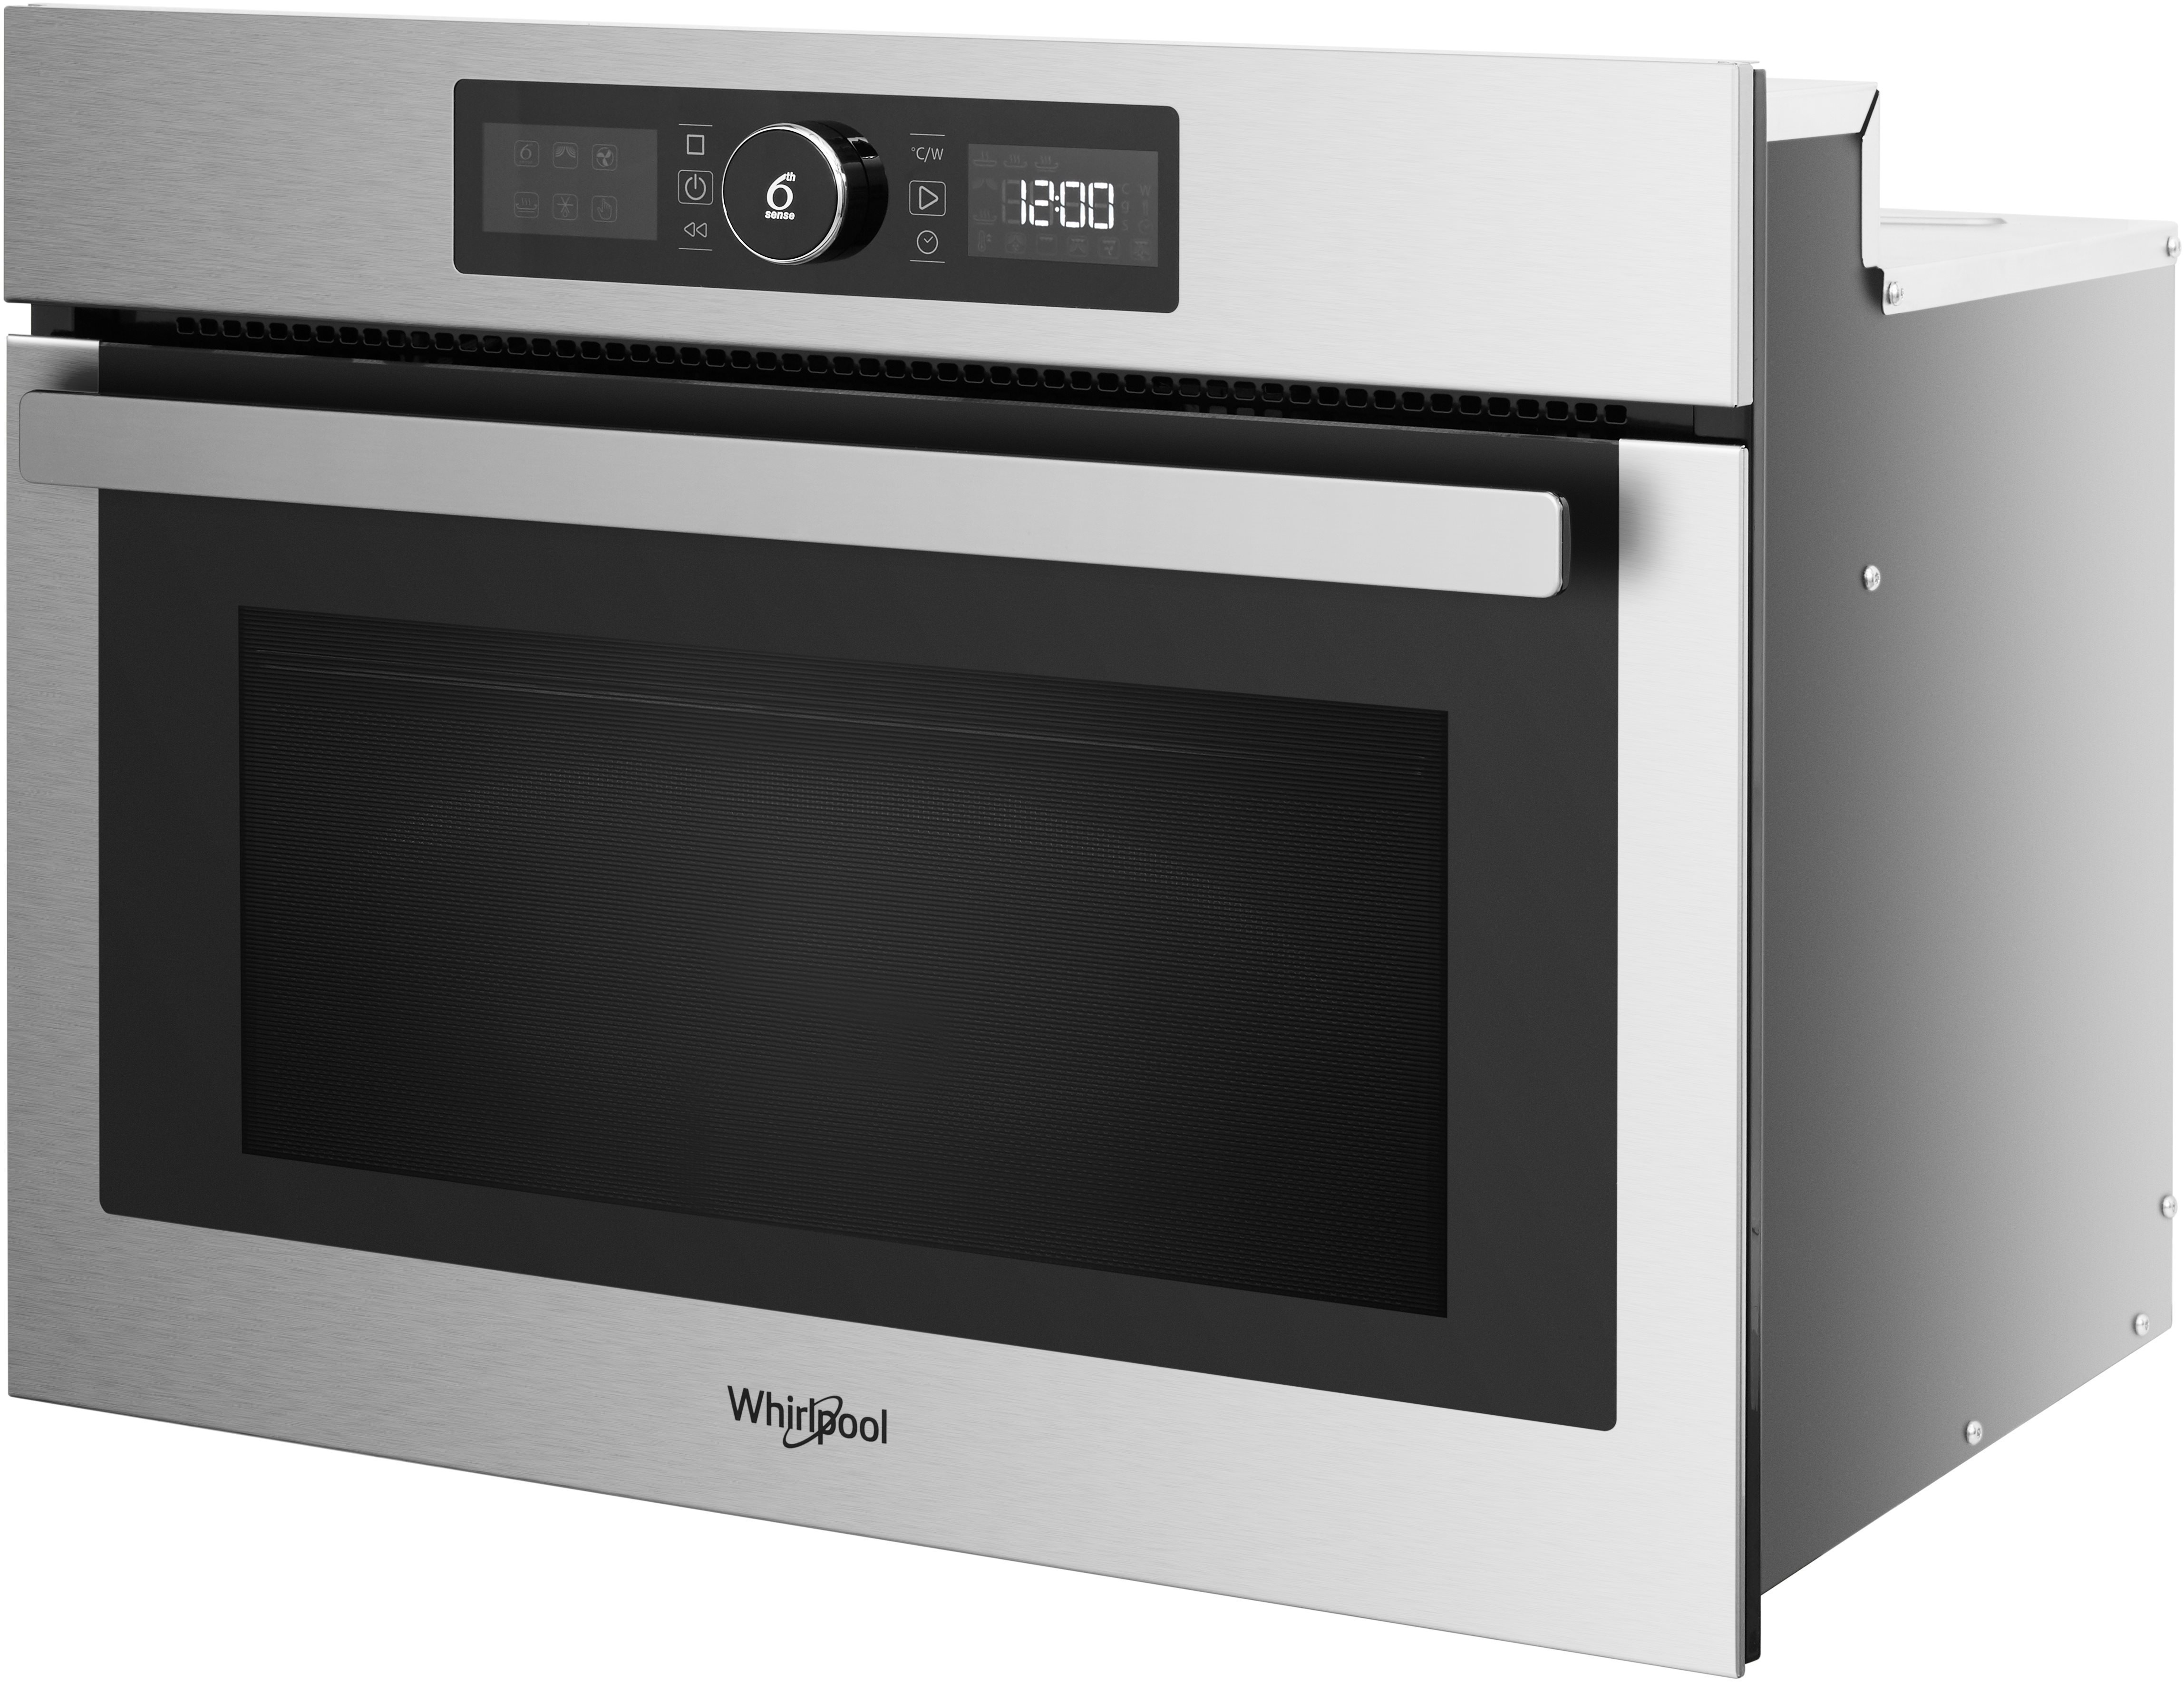 Microwave WHIRLPOOL ABSOLUTE AMW 506/IX Lateral view